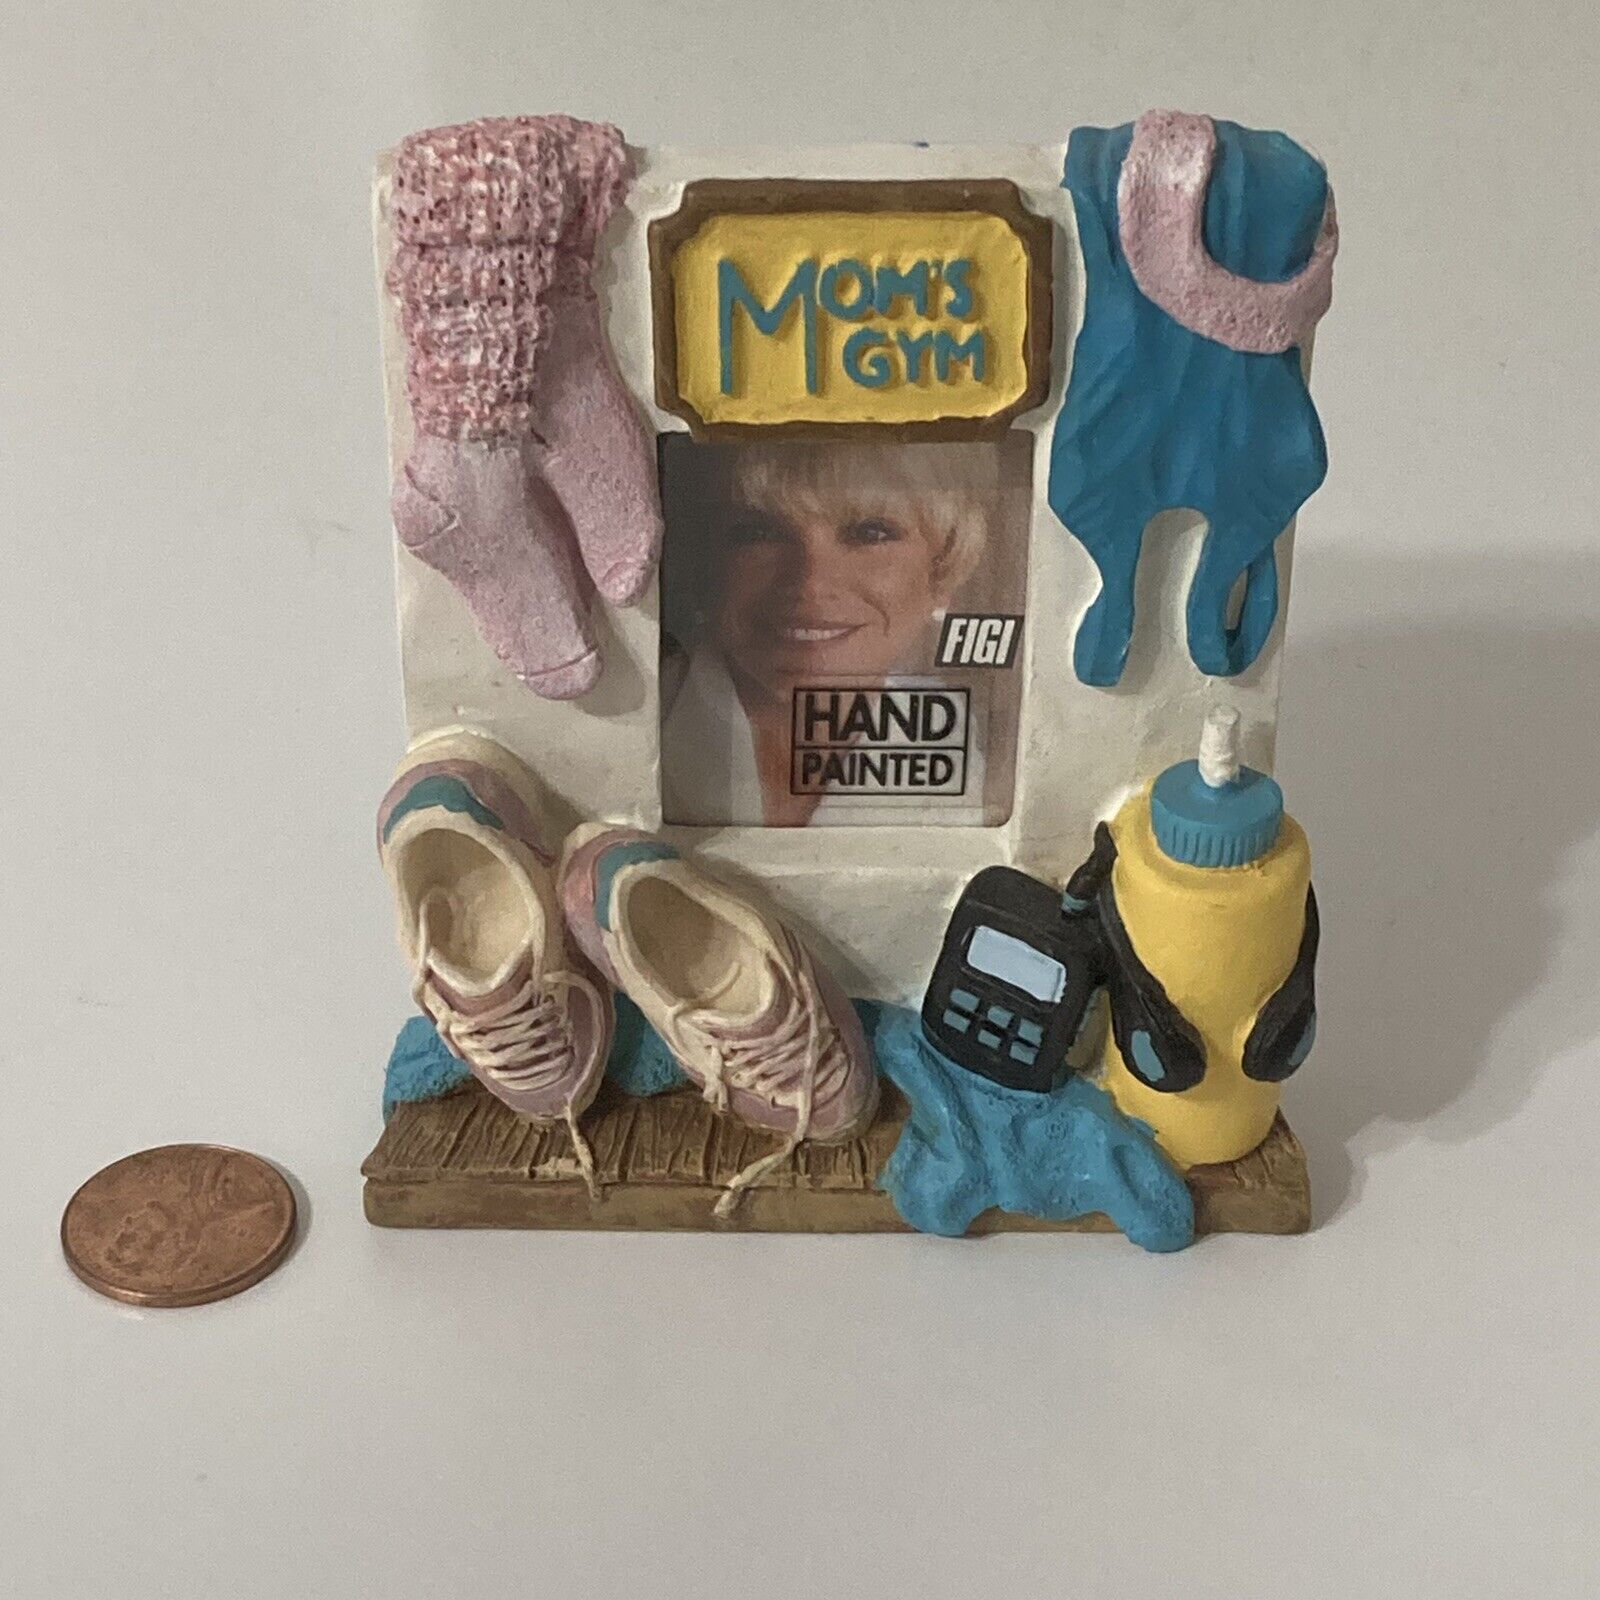 Vintage Mom’s Gym Mini 90s Picture Frame 1995 FIGI Graphics Hand Painted Sports